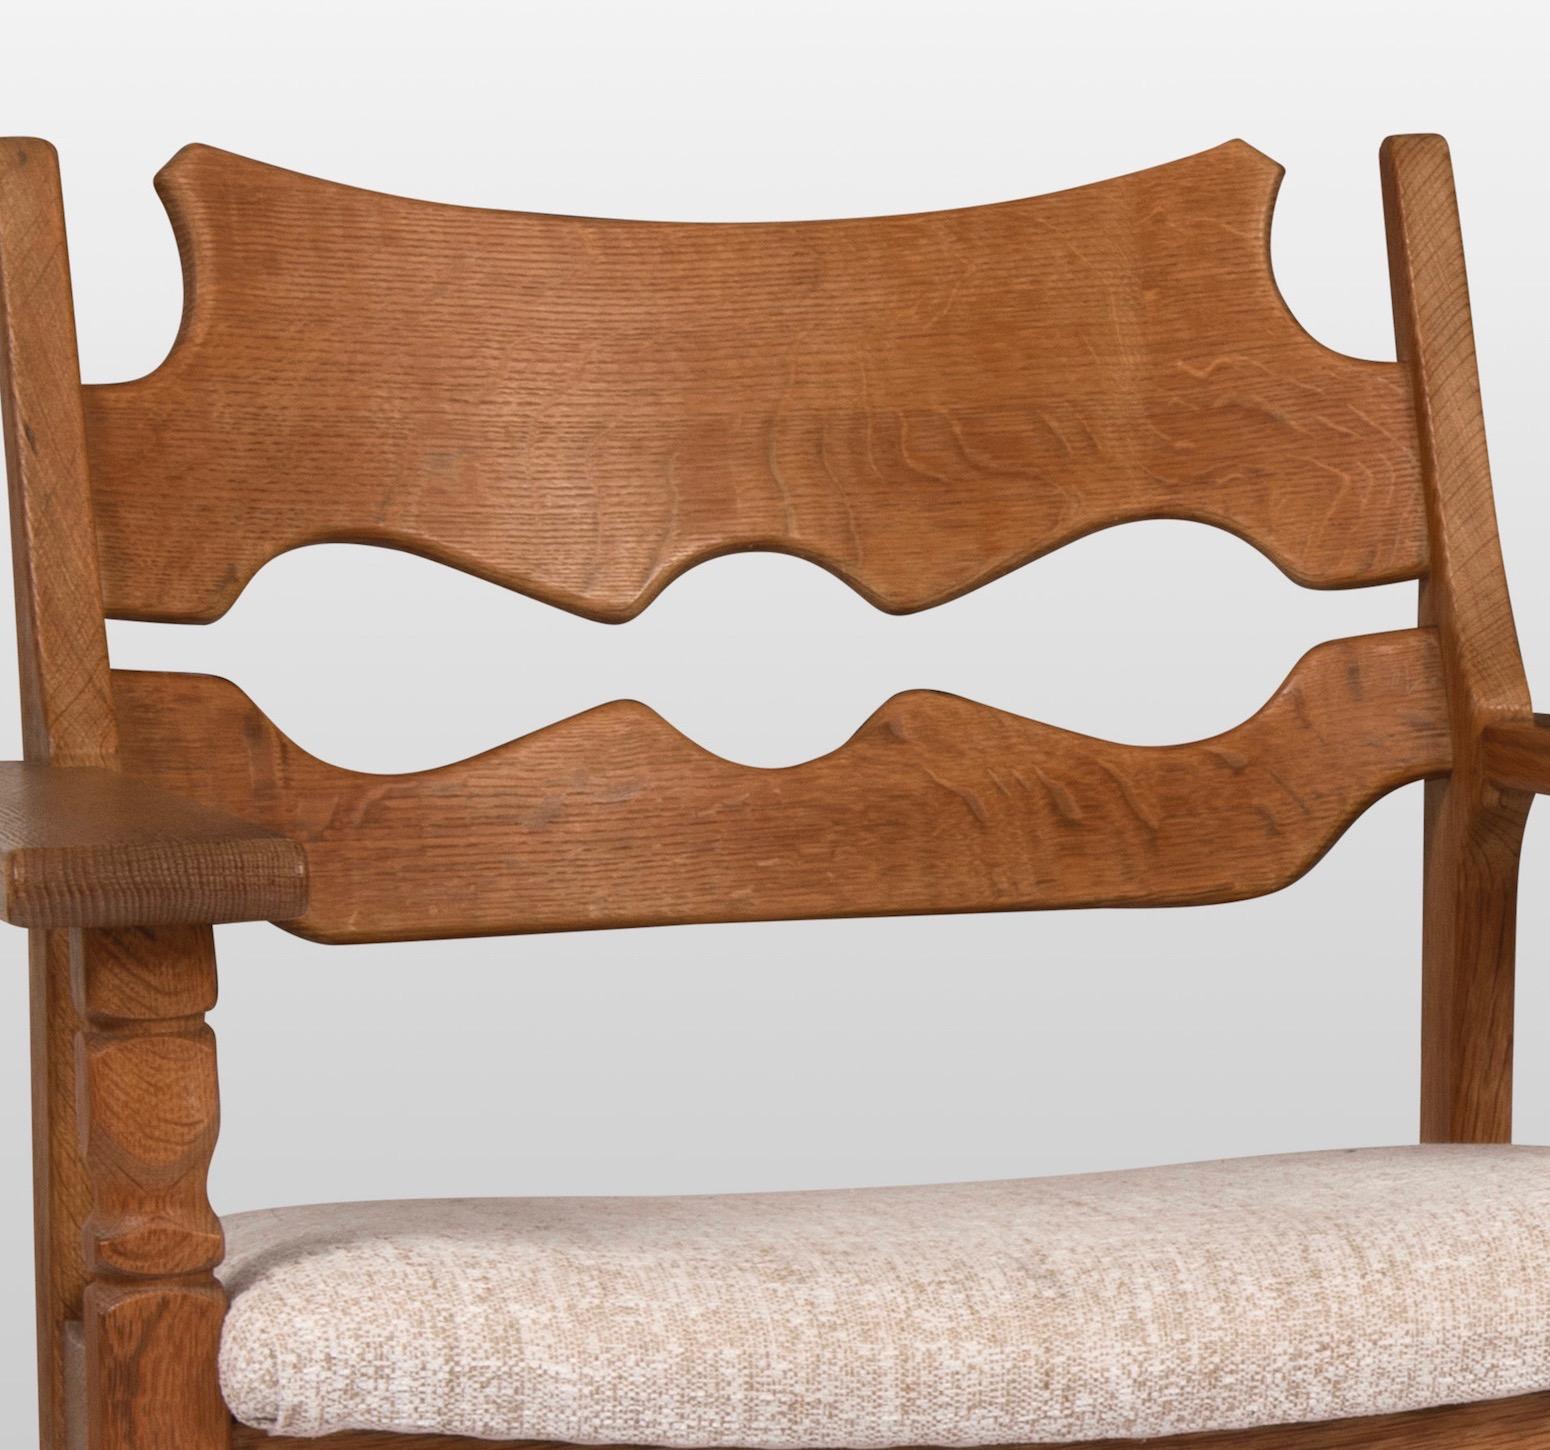 A pair of razorback lounge chairs by Danish designer Henning Kjaernulf. This is his iconic design. Made of oak and reuphostered in toile chiné. Manufactured by EG Kvalitetsmøbel.